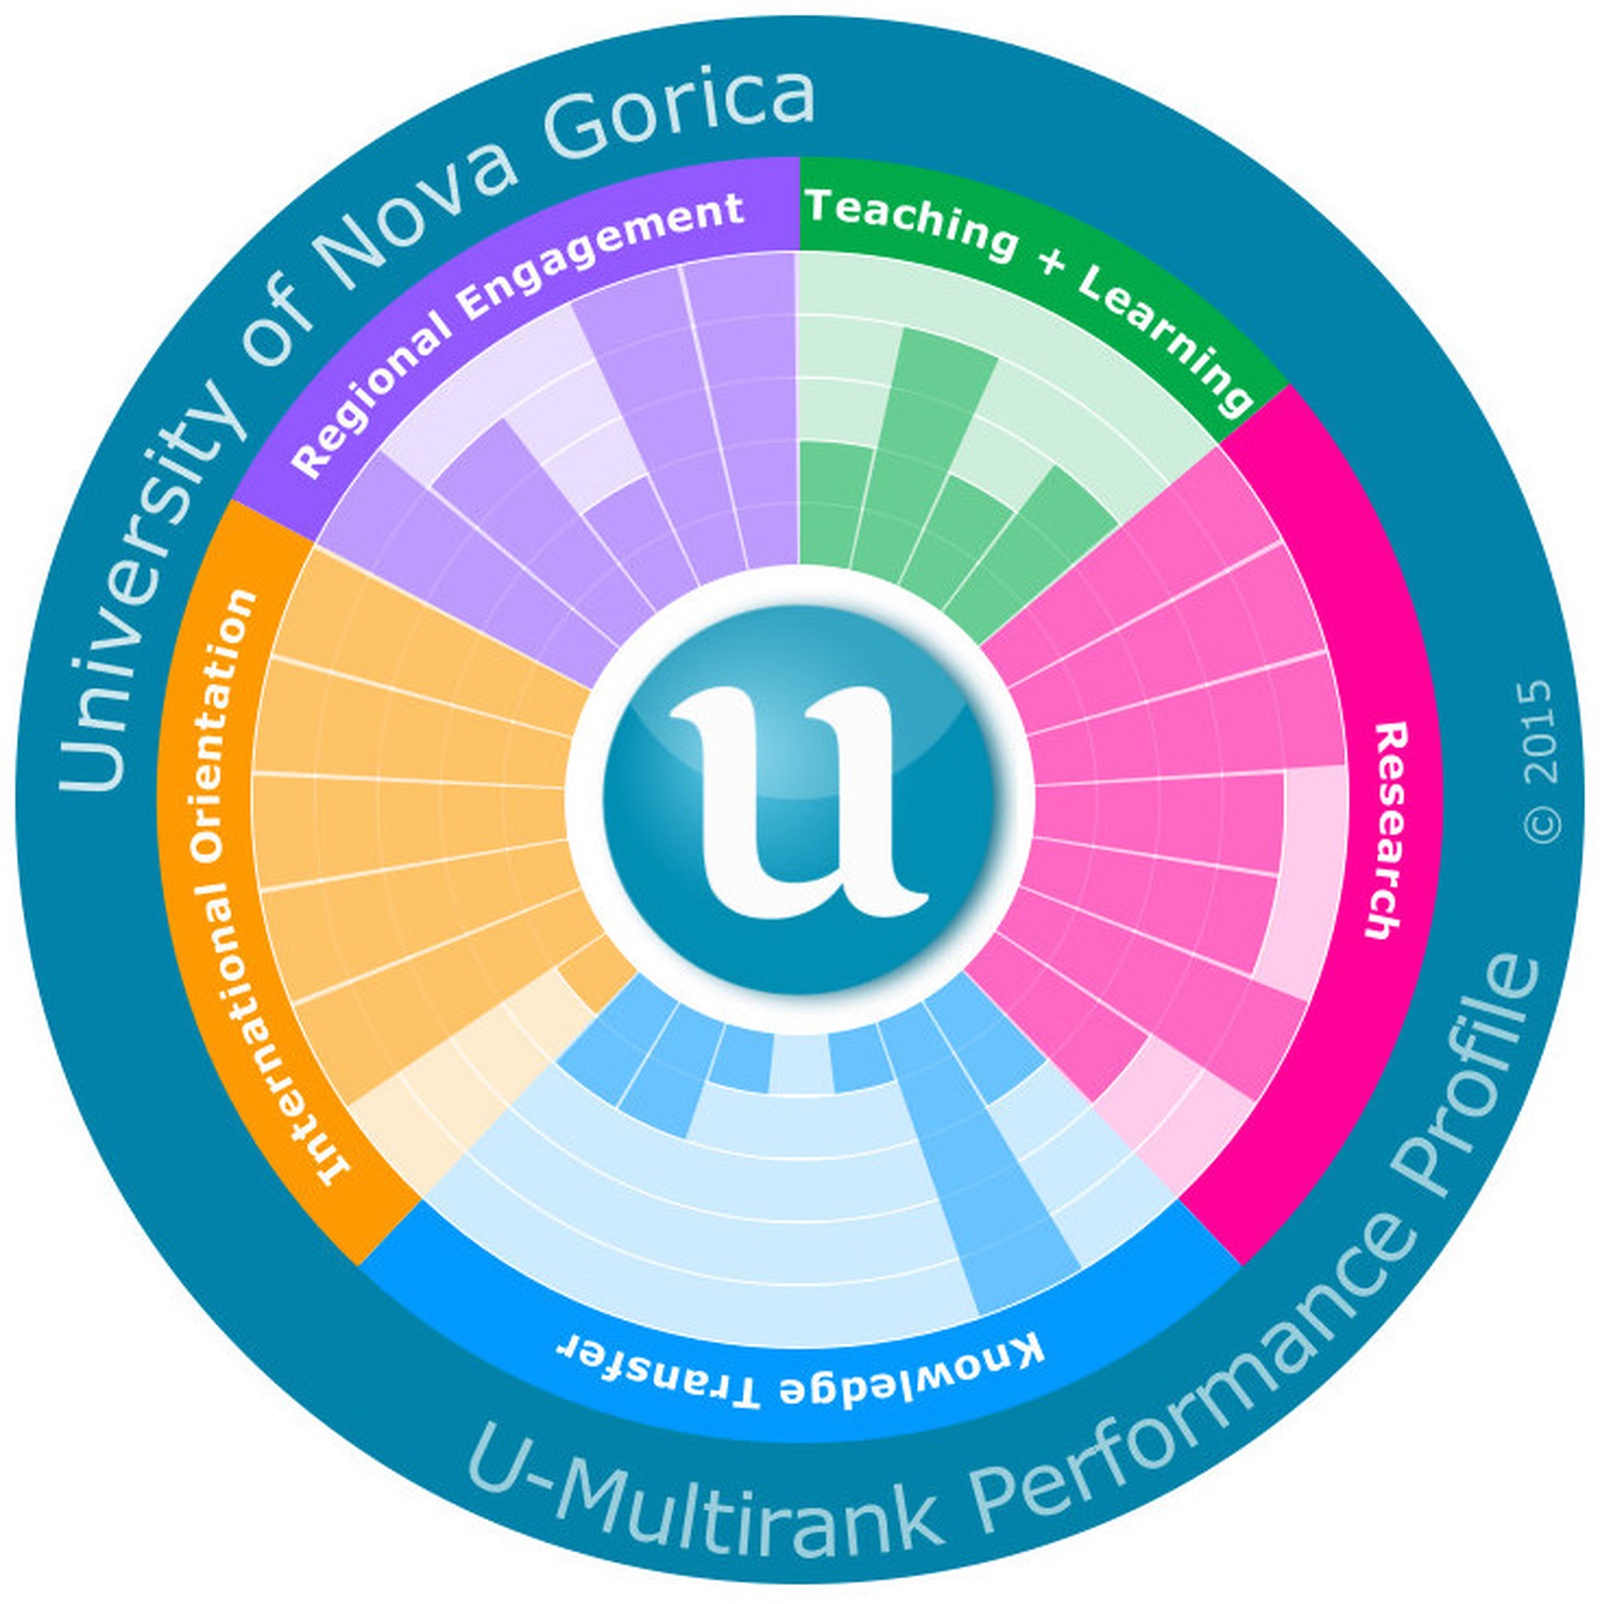 The graphic illustration of UNG’s profile on the  U-Multirank 2015 global ranking chart. The height of each column within a specific circular sector denotes a grade achieved for a specific criterion (the tallest column stands for 1 – exceptionally good, and the lowest column stands for 5 –weak).